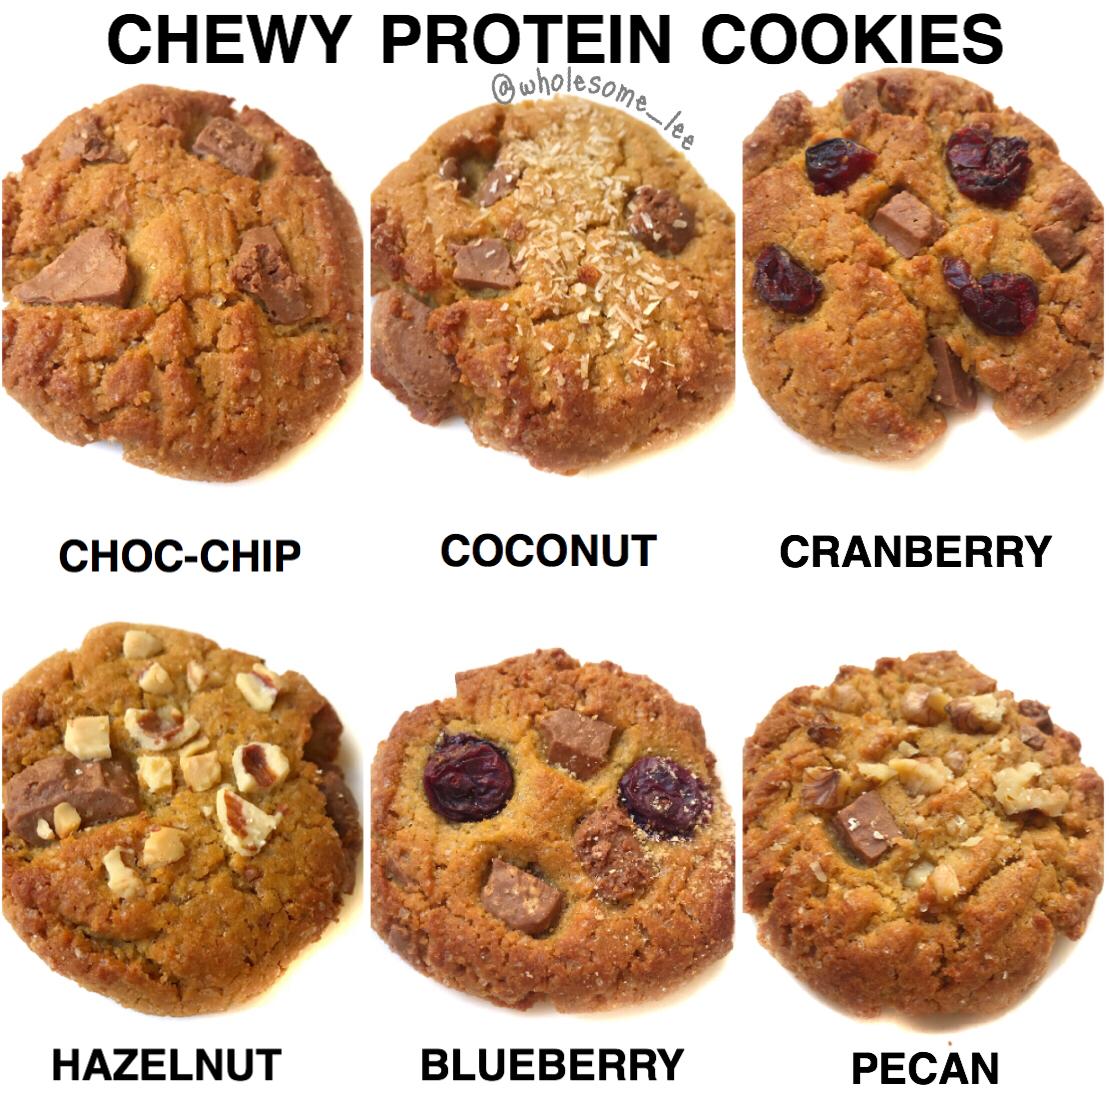 Chewy Protein Cookies